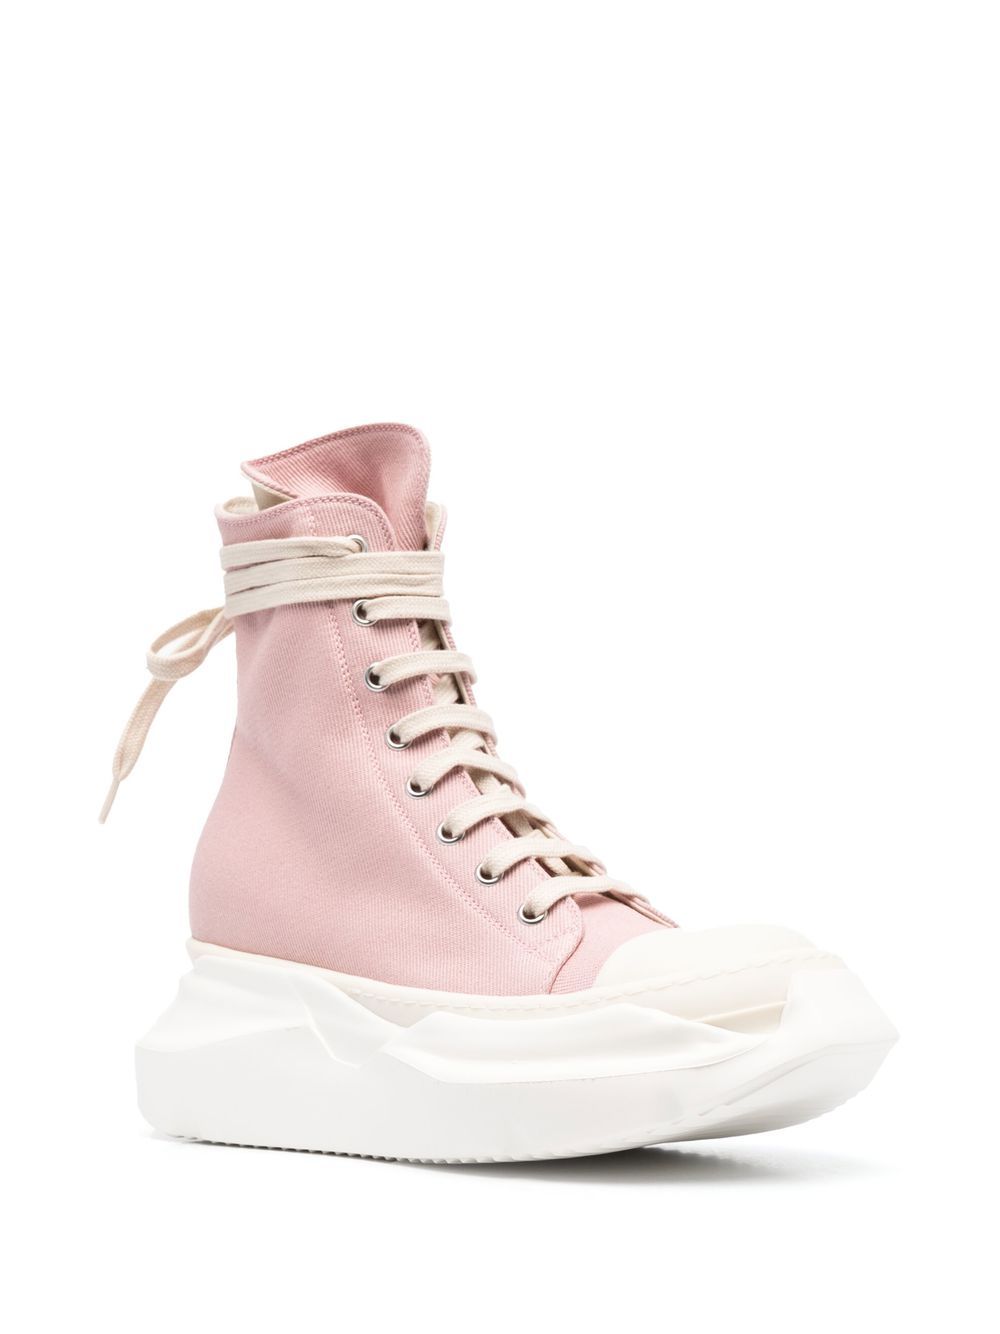 Rick Owens DRKSHDW Chunky Sole high-top Sneakers - Farfetch